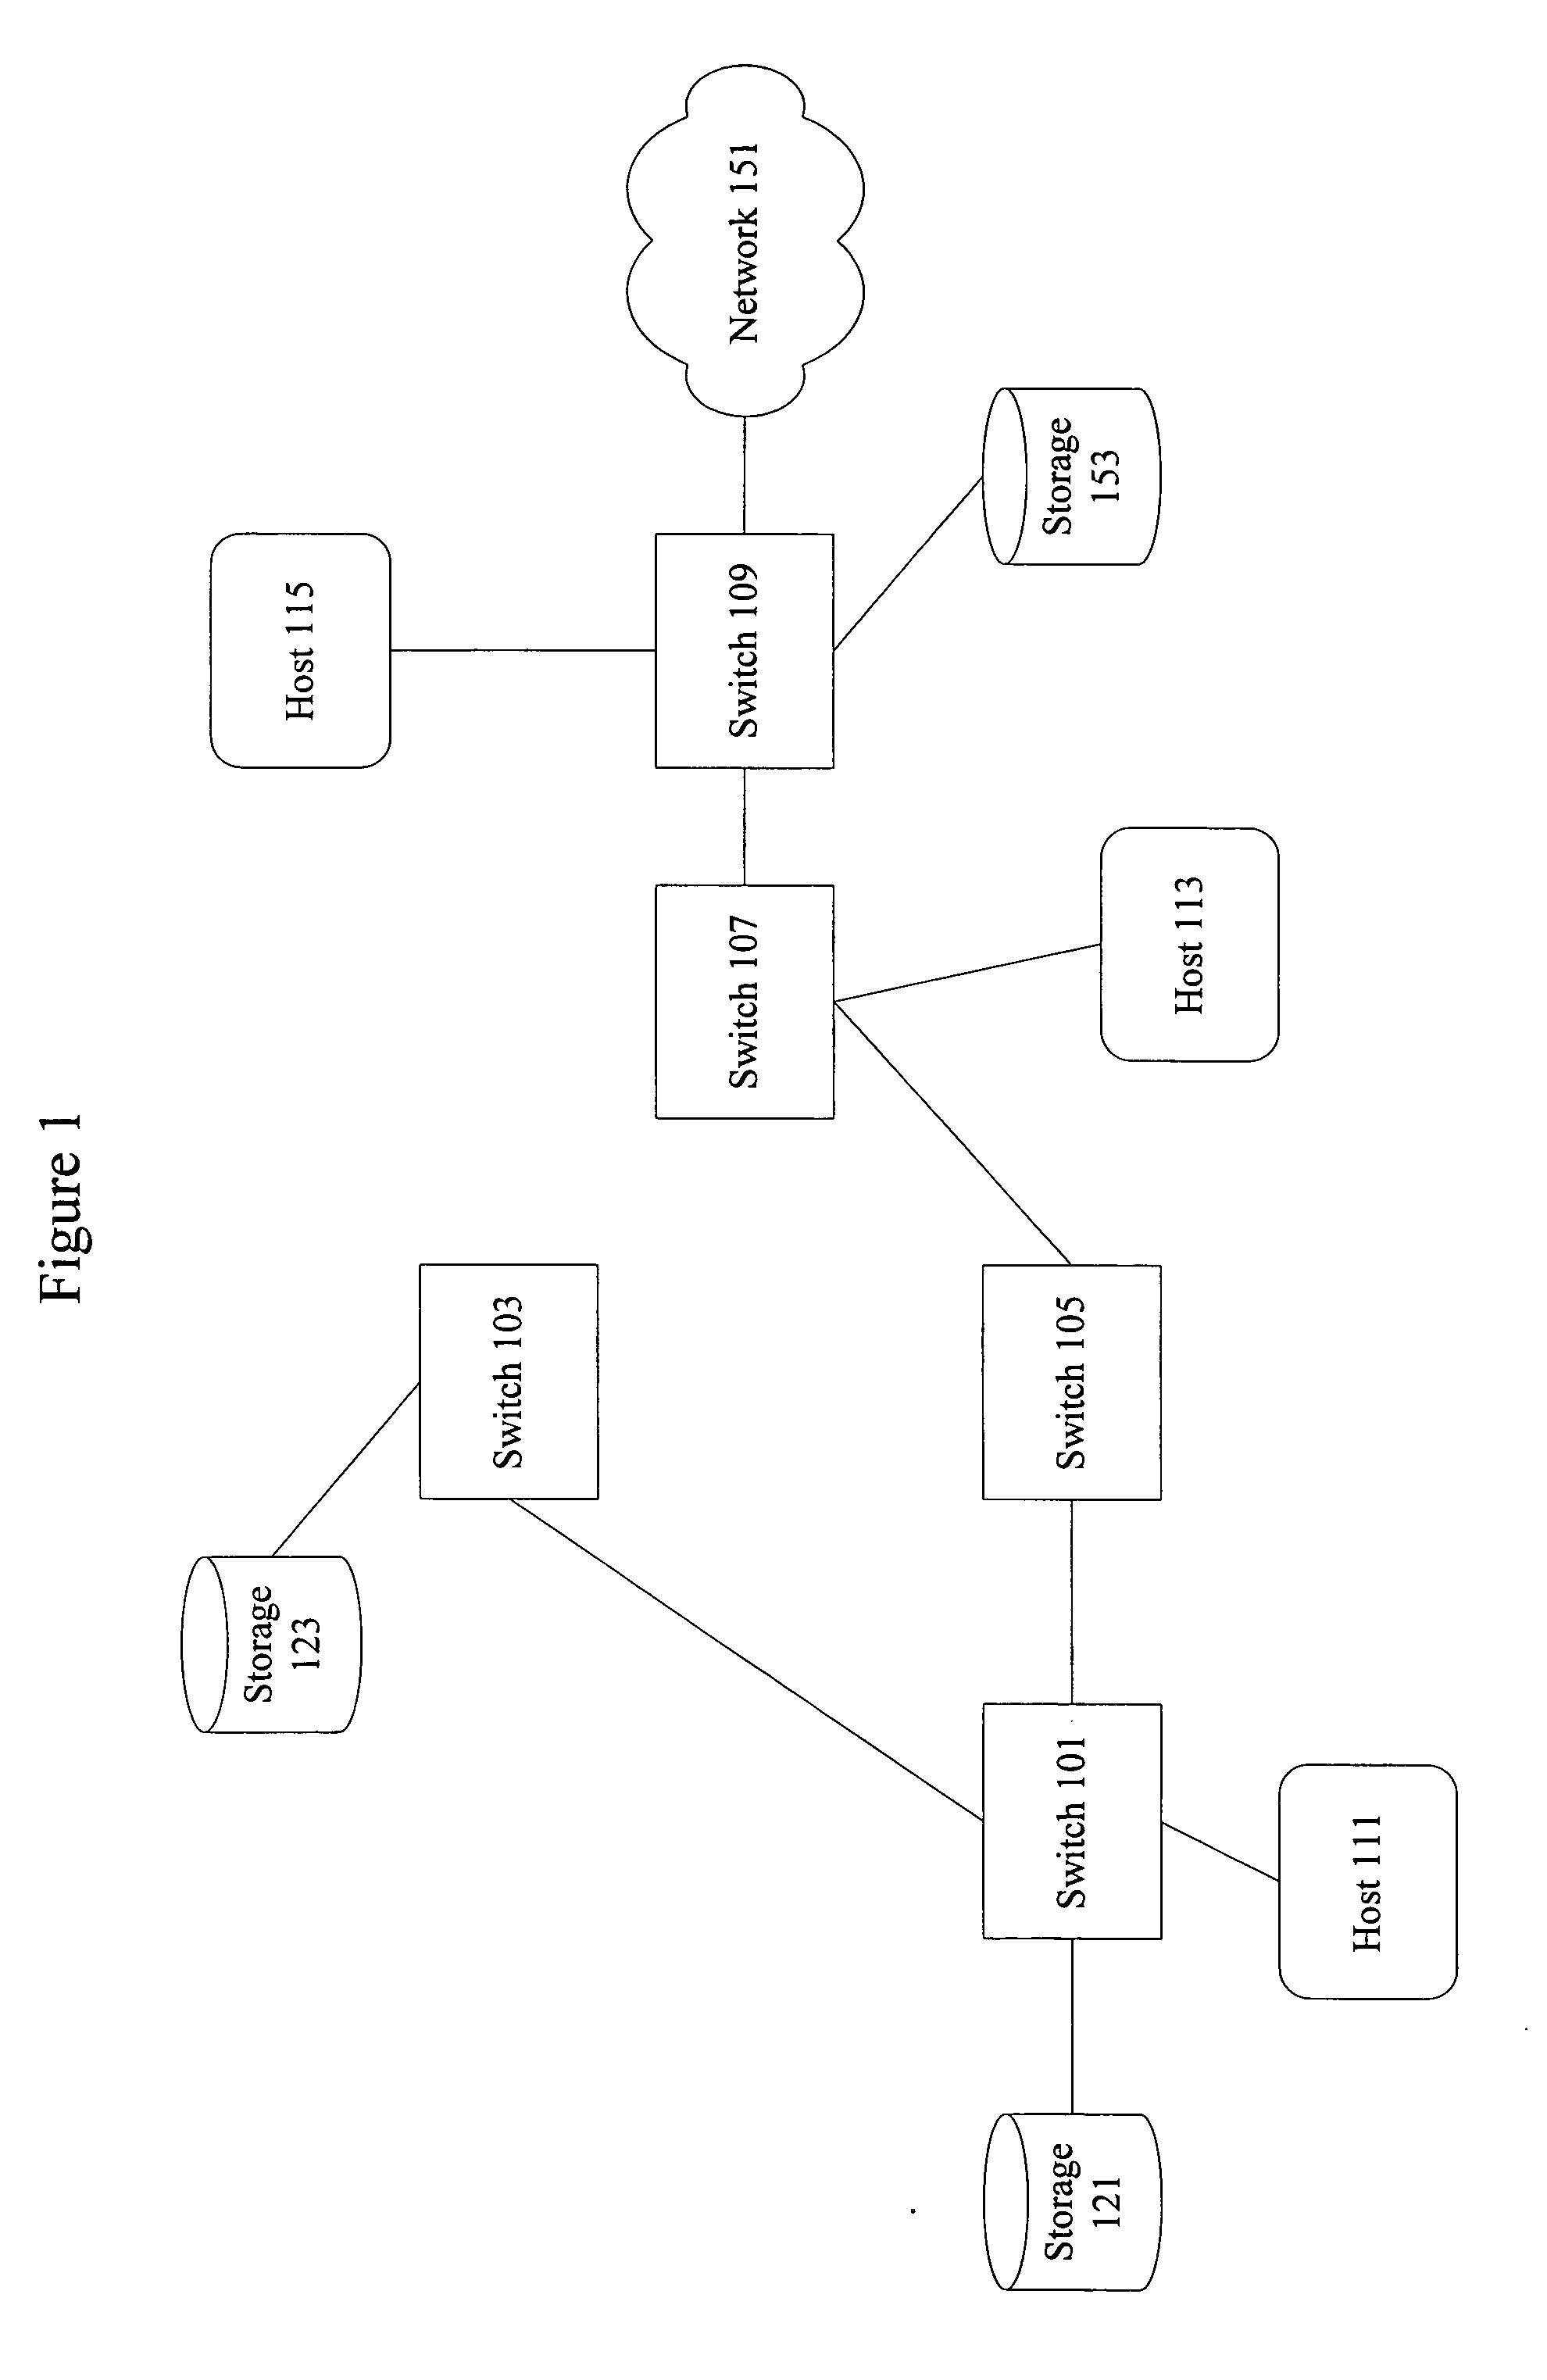 Network topology based storage allocation for virtualization